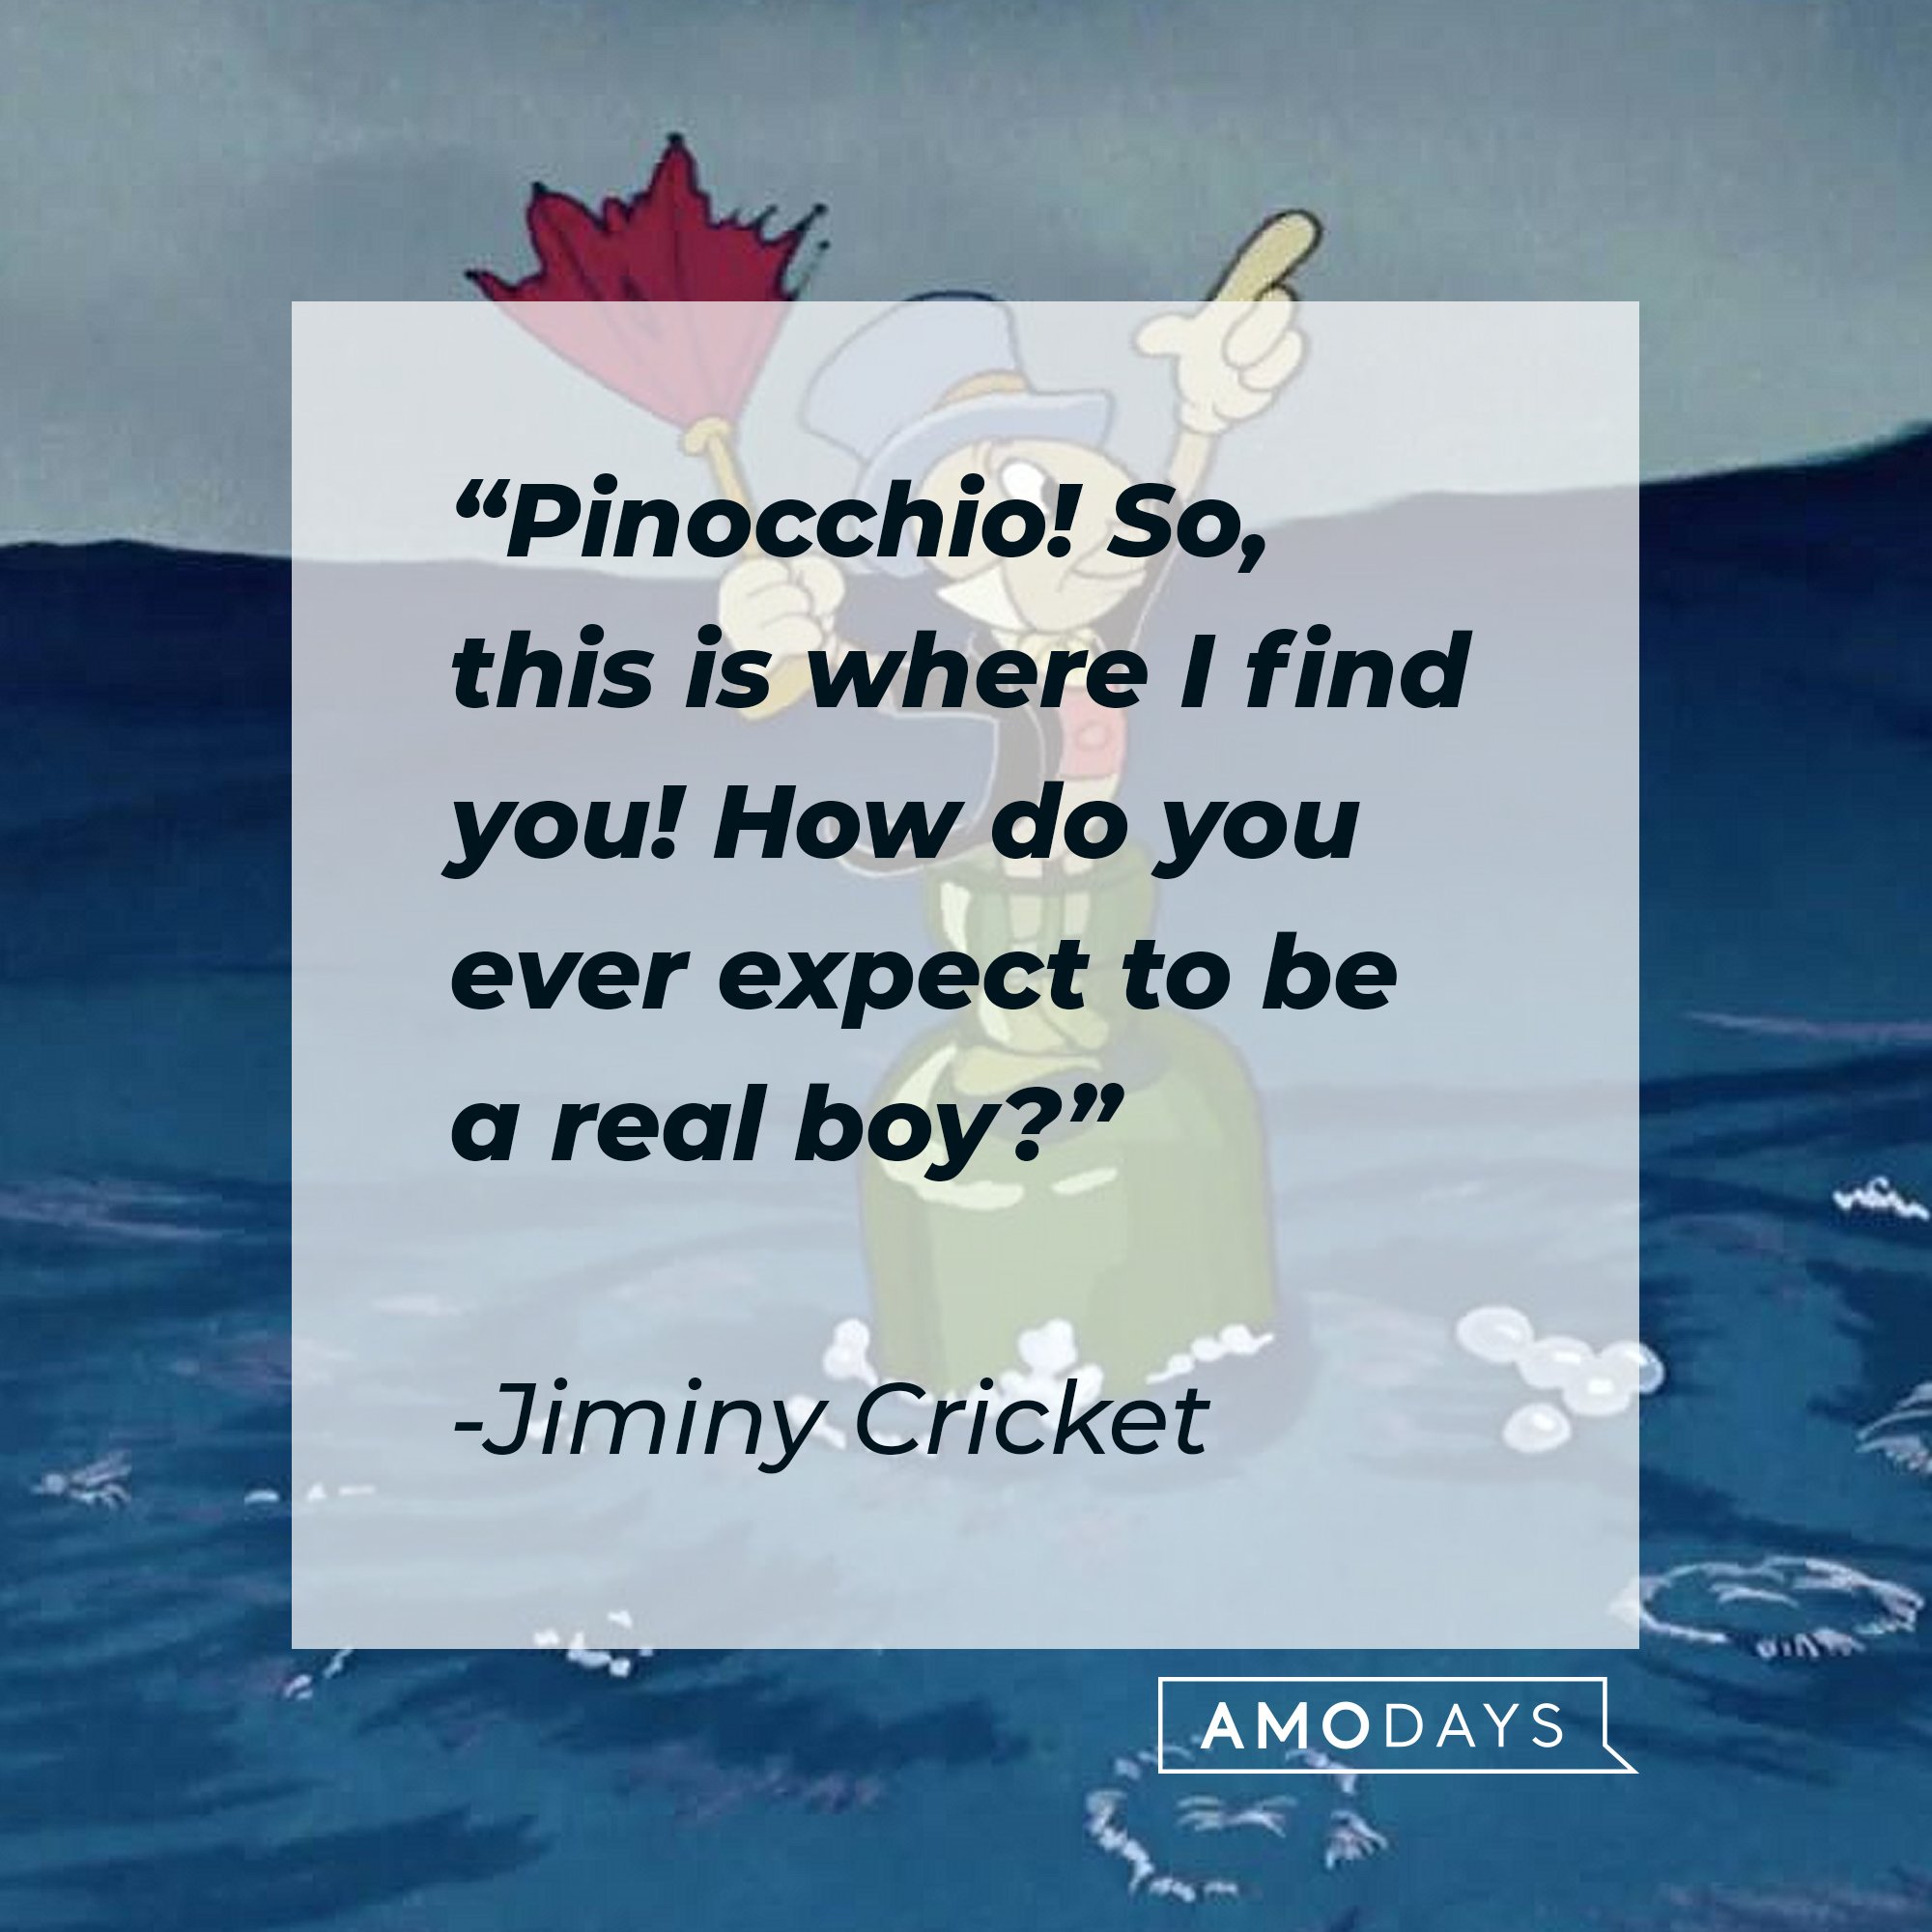  Jiminy Cricket's quote: "Pinocchio! So, this is where I find you! How do you ever expect to be a real boy?" | Image: AmoDays